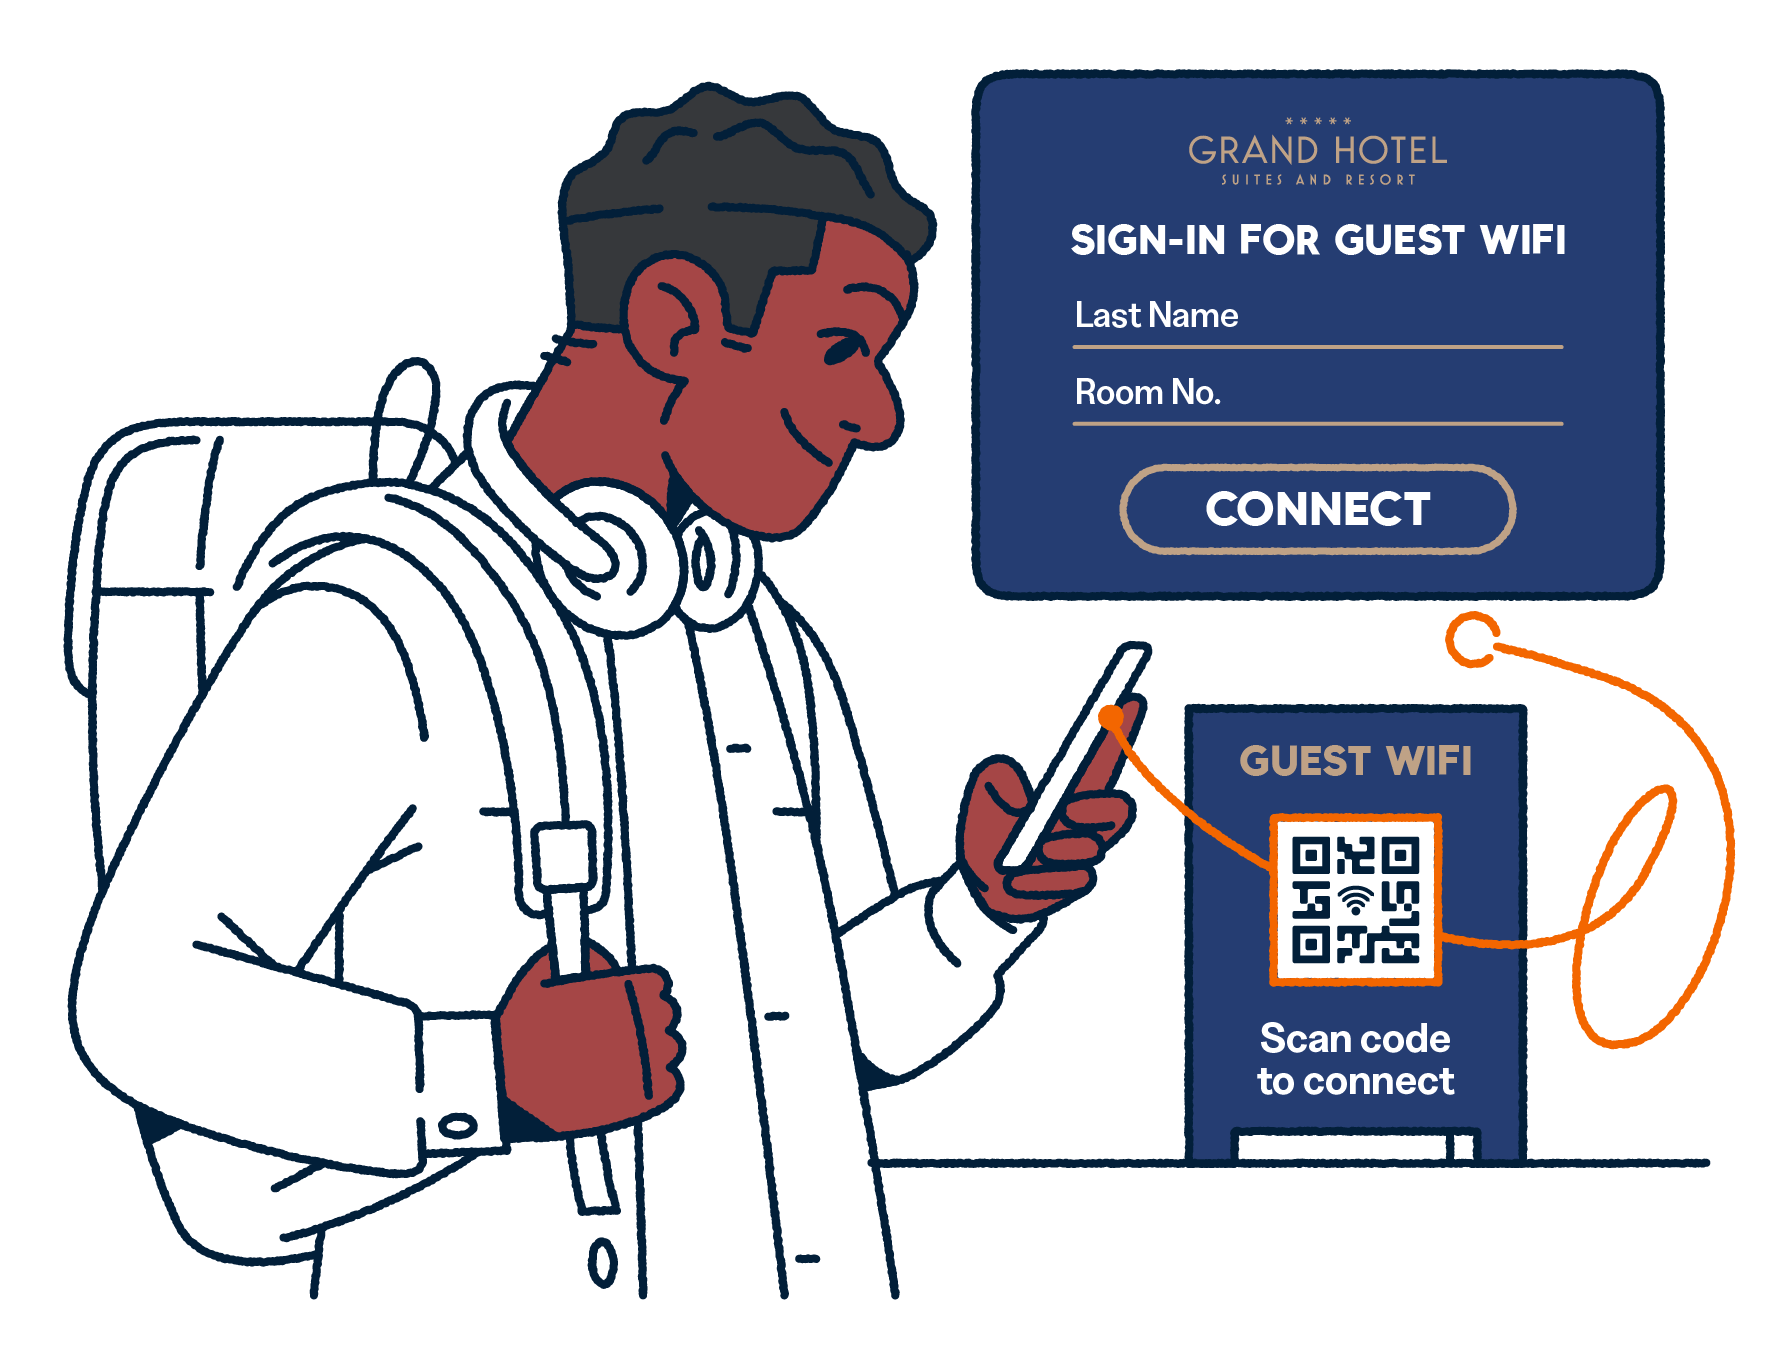 Sign for guest wifi image 